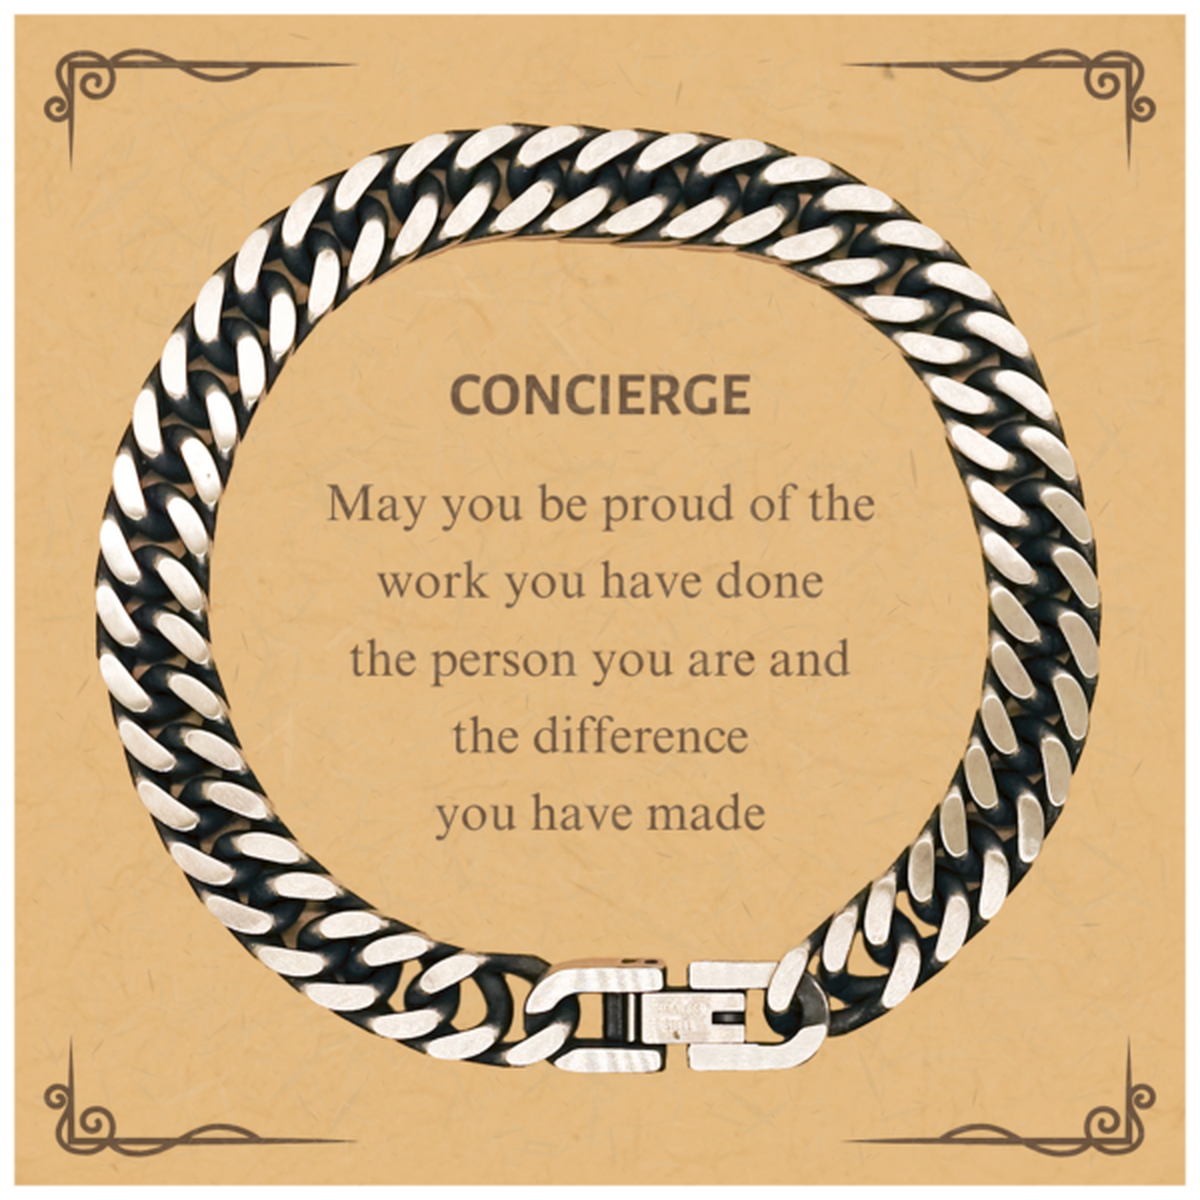 Concierge May you be proud of the work you have done, Retirement Concierge Cuban Link Chain Bracelet for Colleague Appreciation Gifts Amazing for Concierge